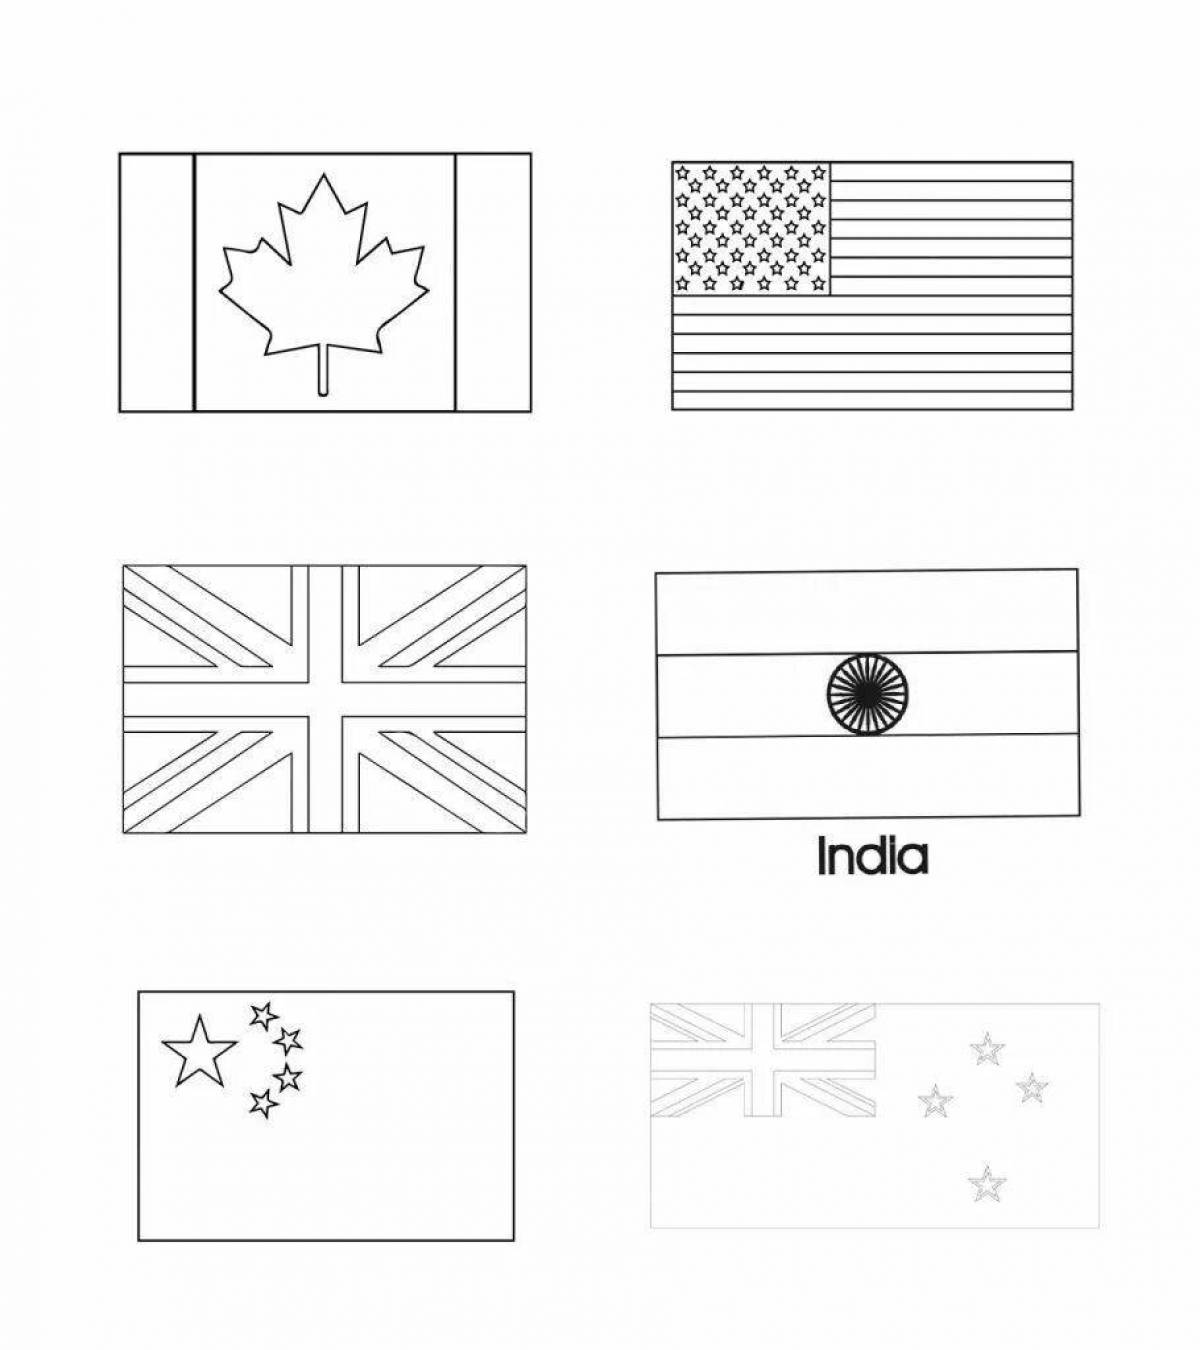 Sweden shiny flag coloring page